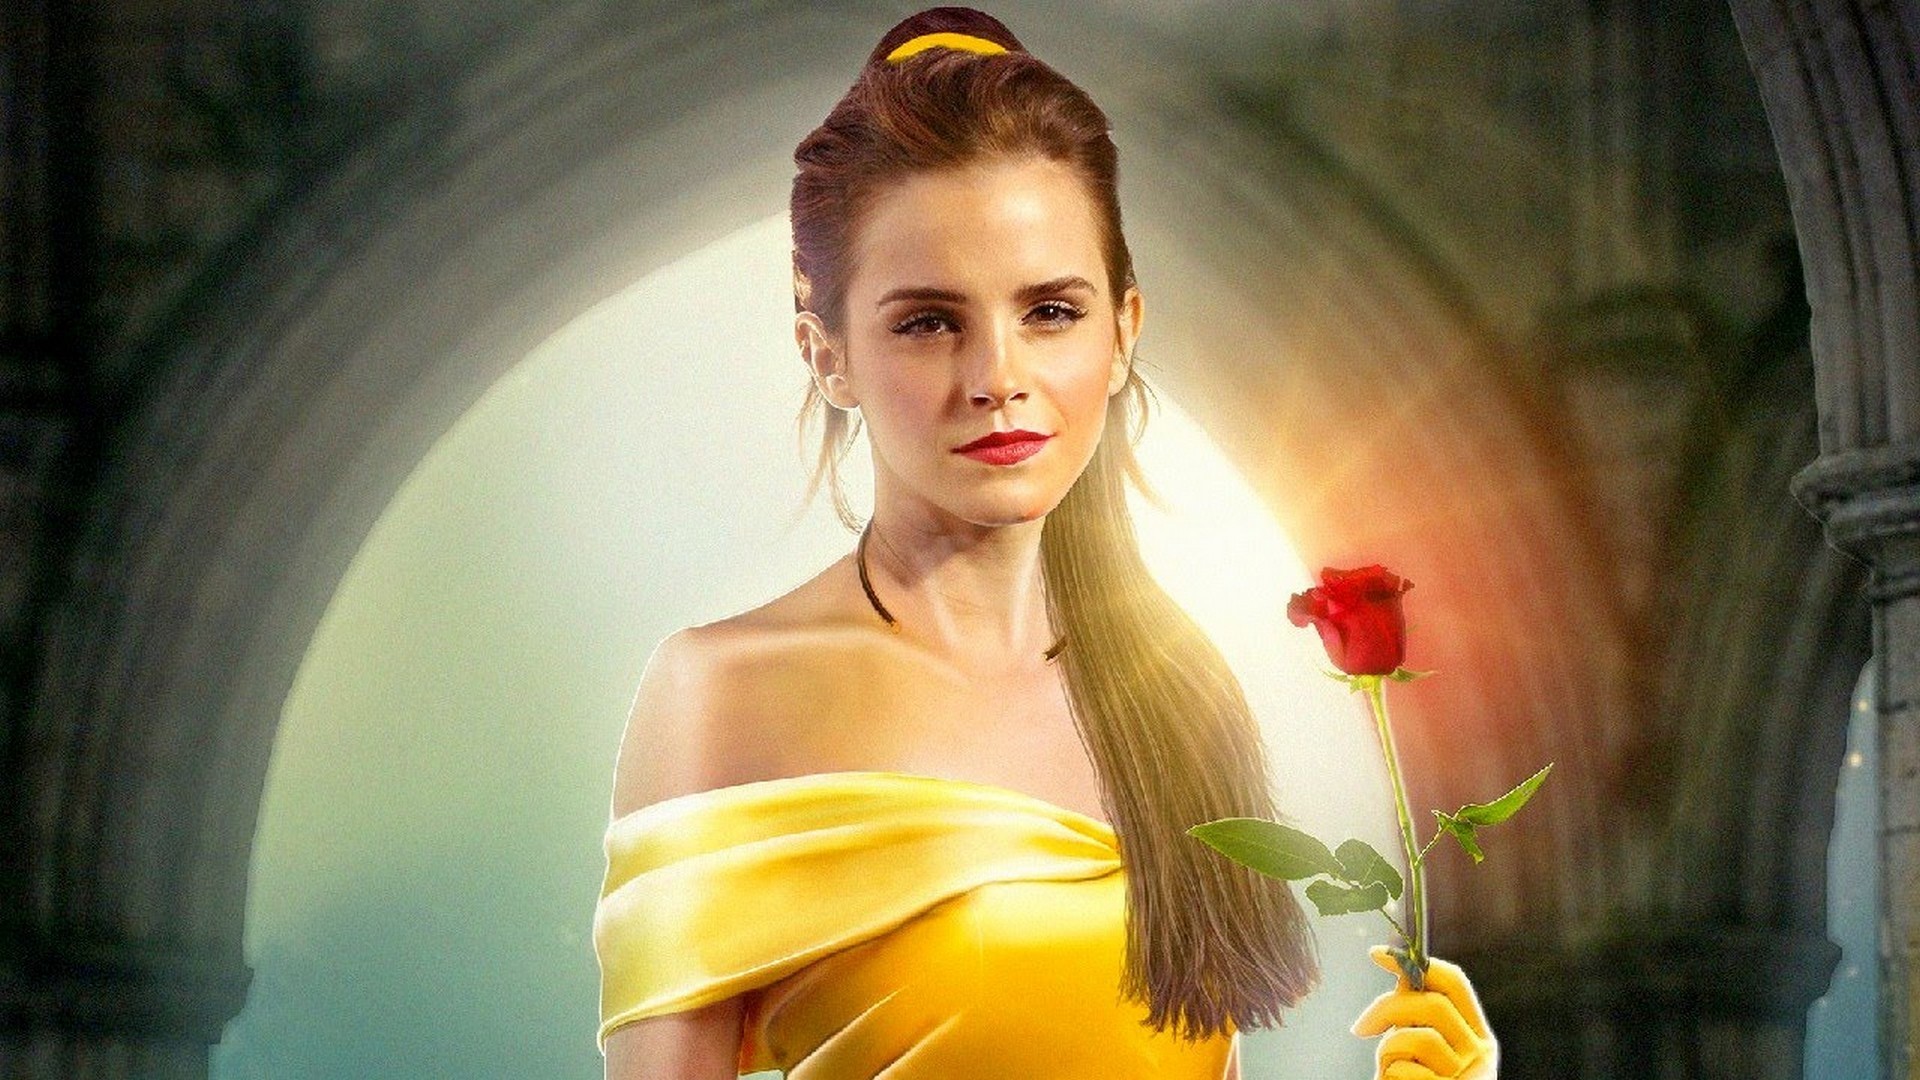 1920x1080 Beauty and the Beast wallpaper free